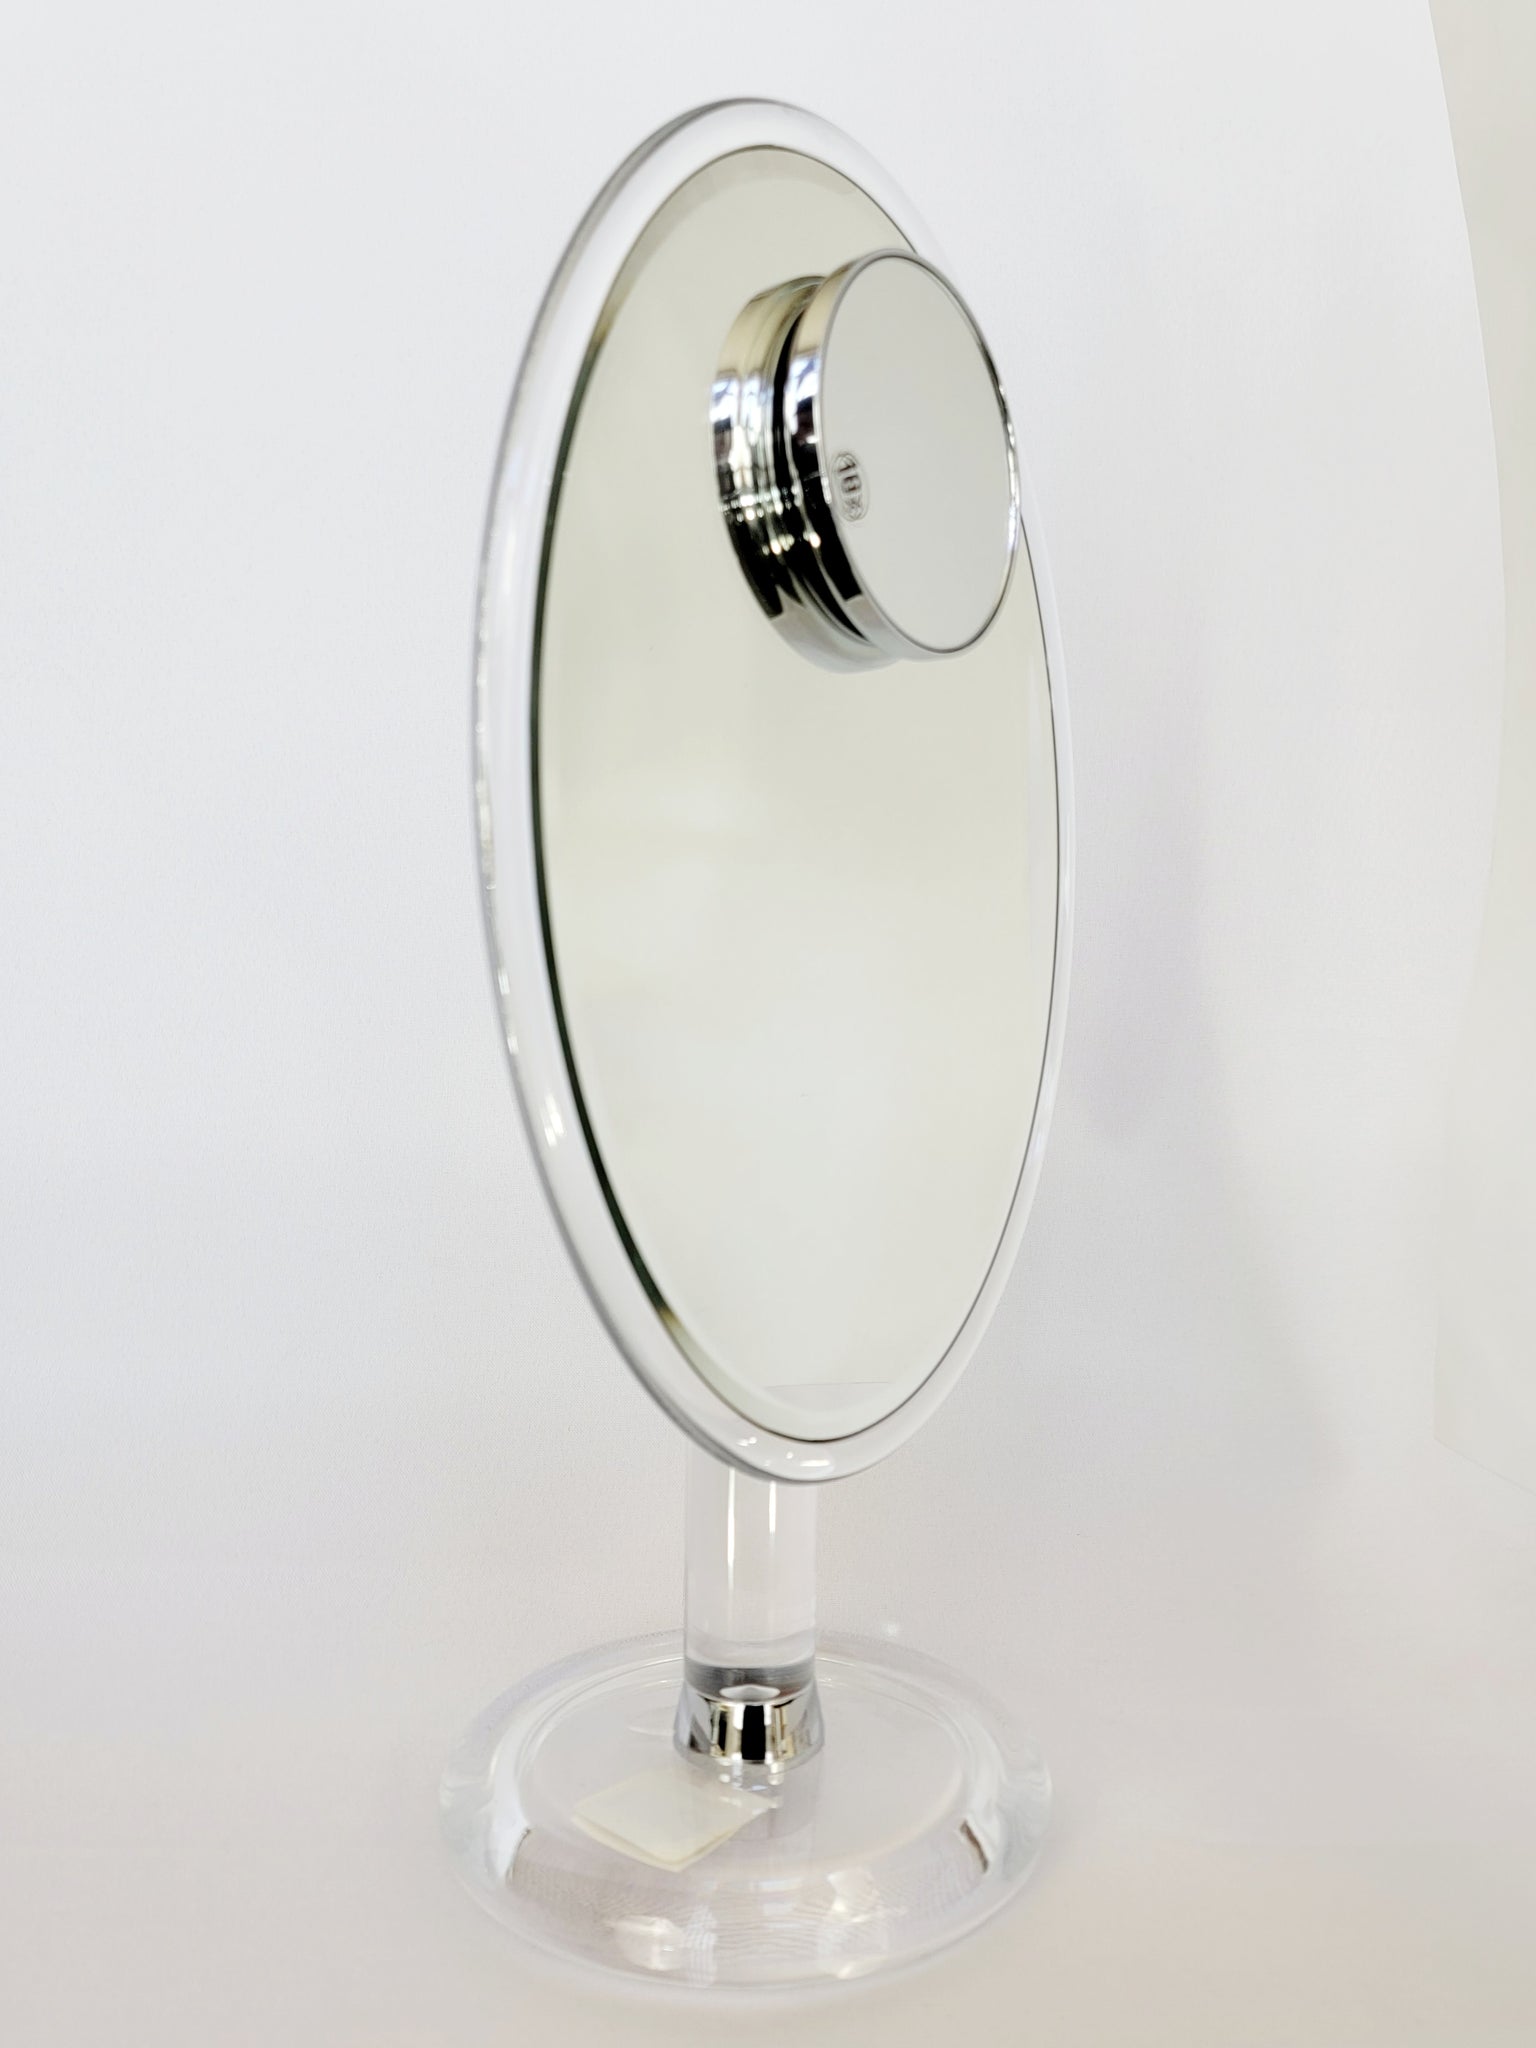 Oval Stand Mirror W/ 10X Magnification Magnetic Insert